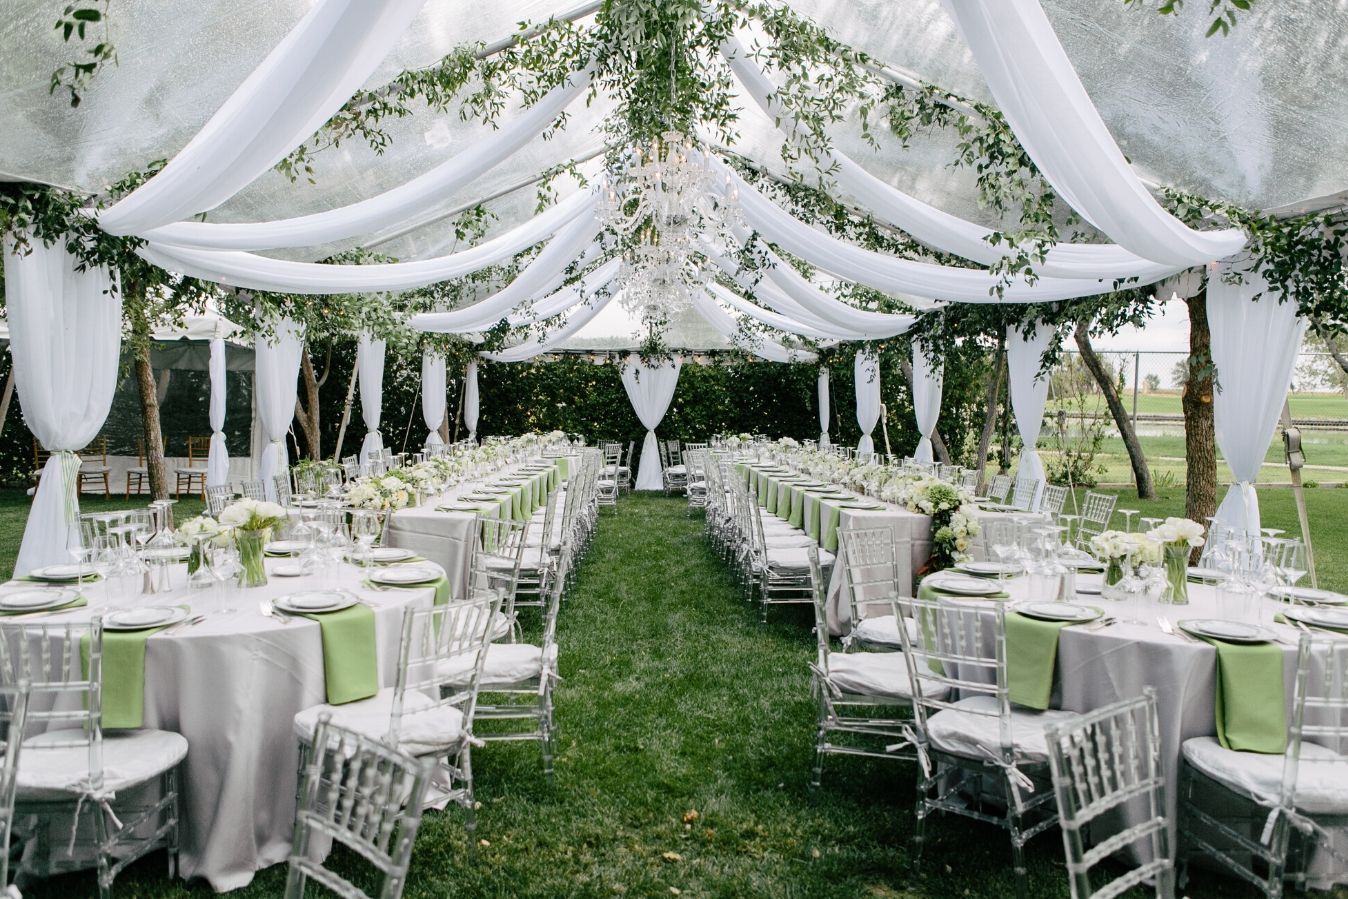 How to Choose the Right Wedding Drapery Fabric